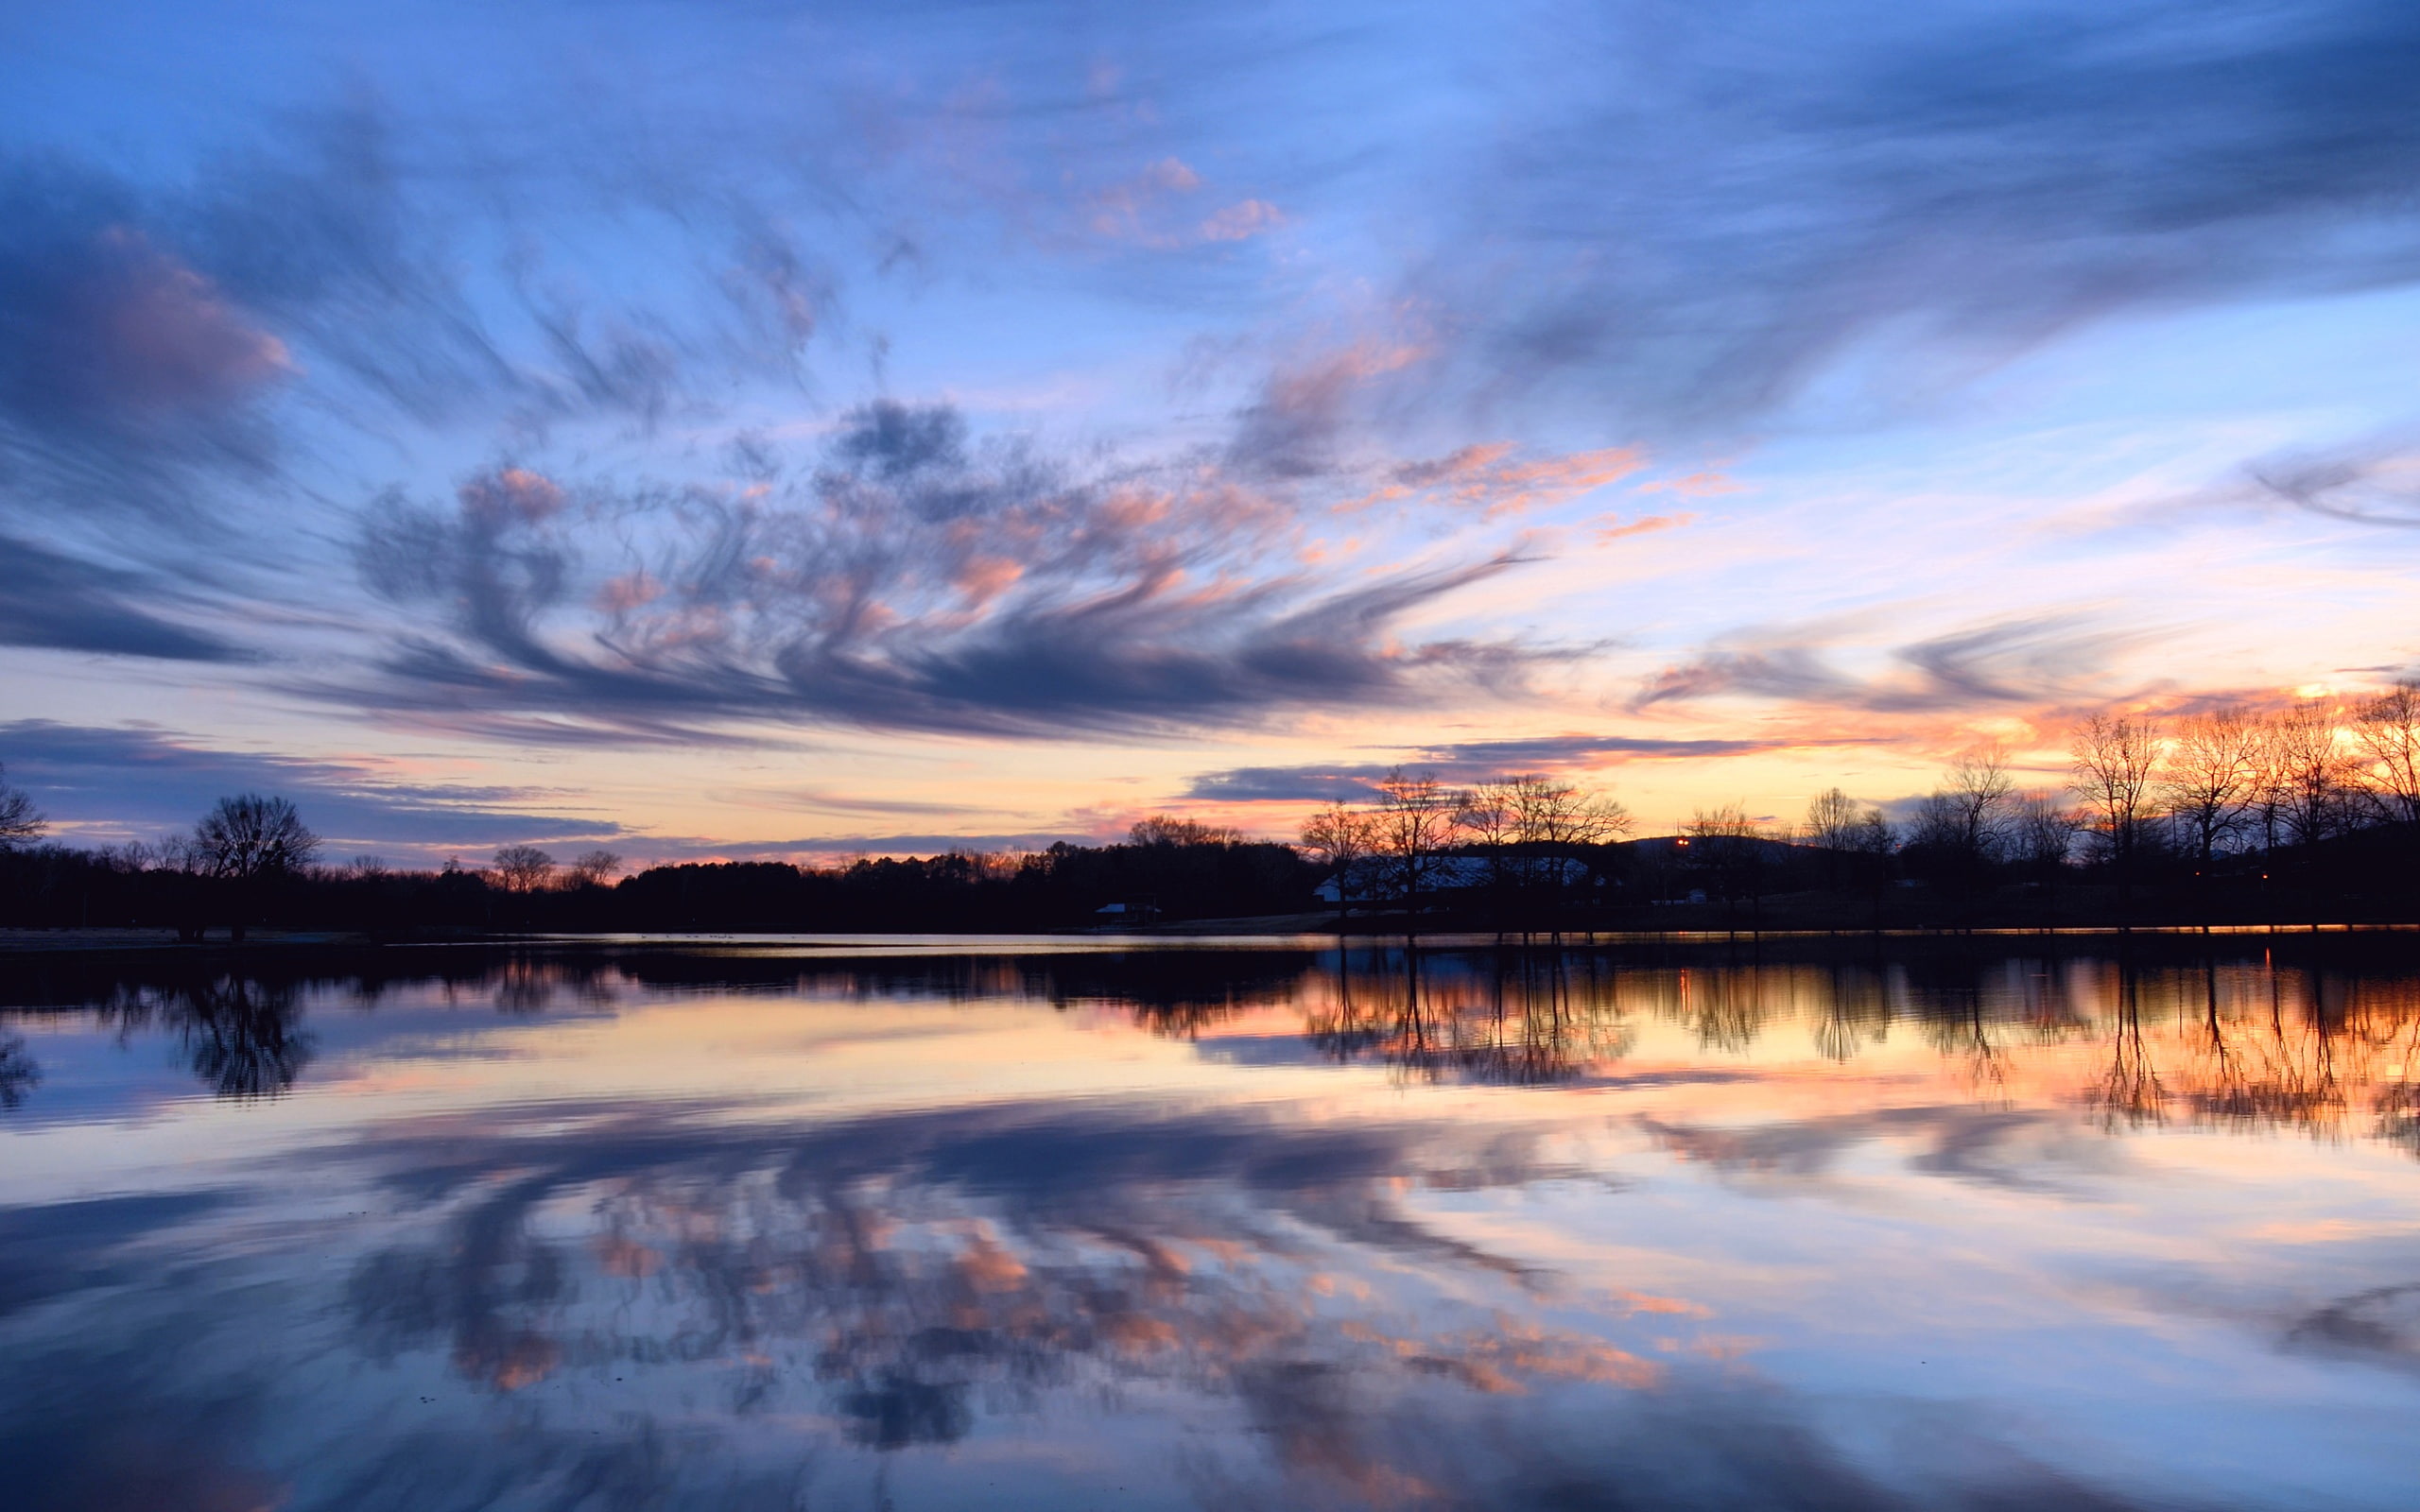 Beautiful sunset, calm lake, reflection in the water, shore trees, sky clouds